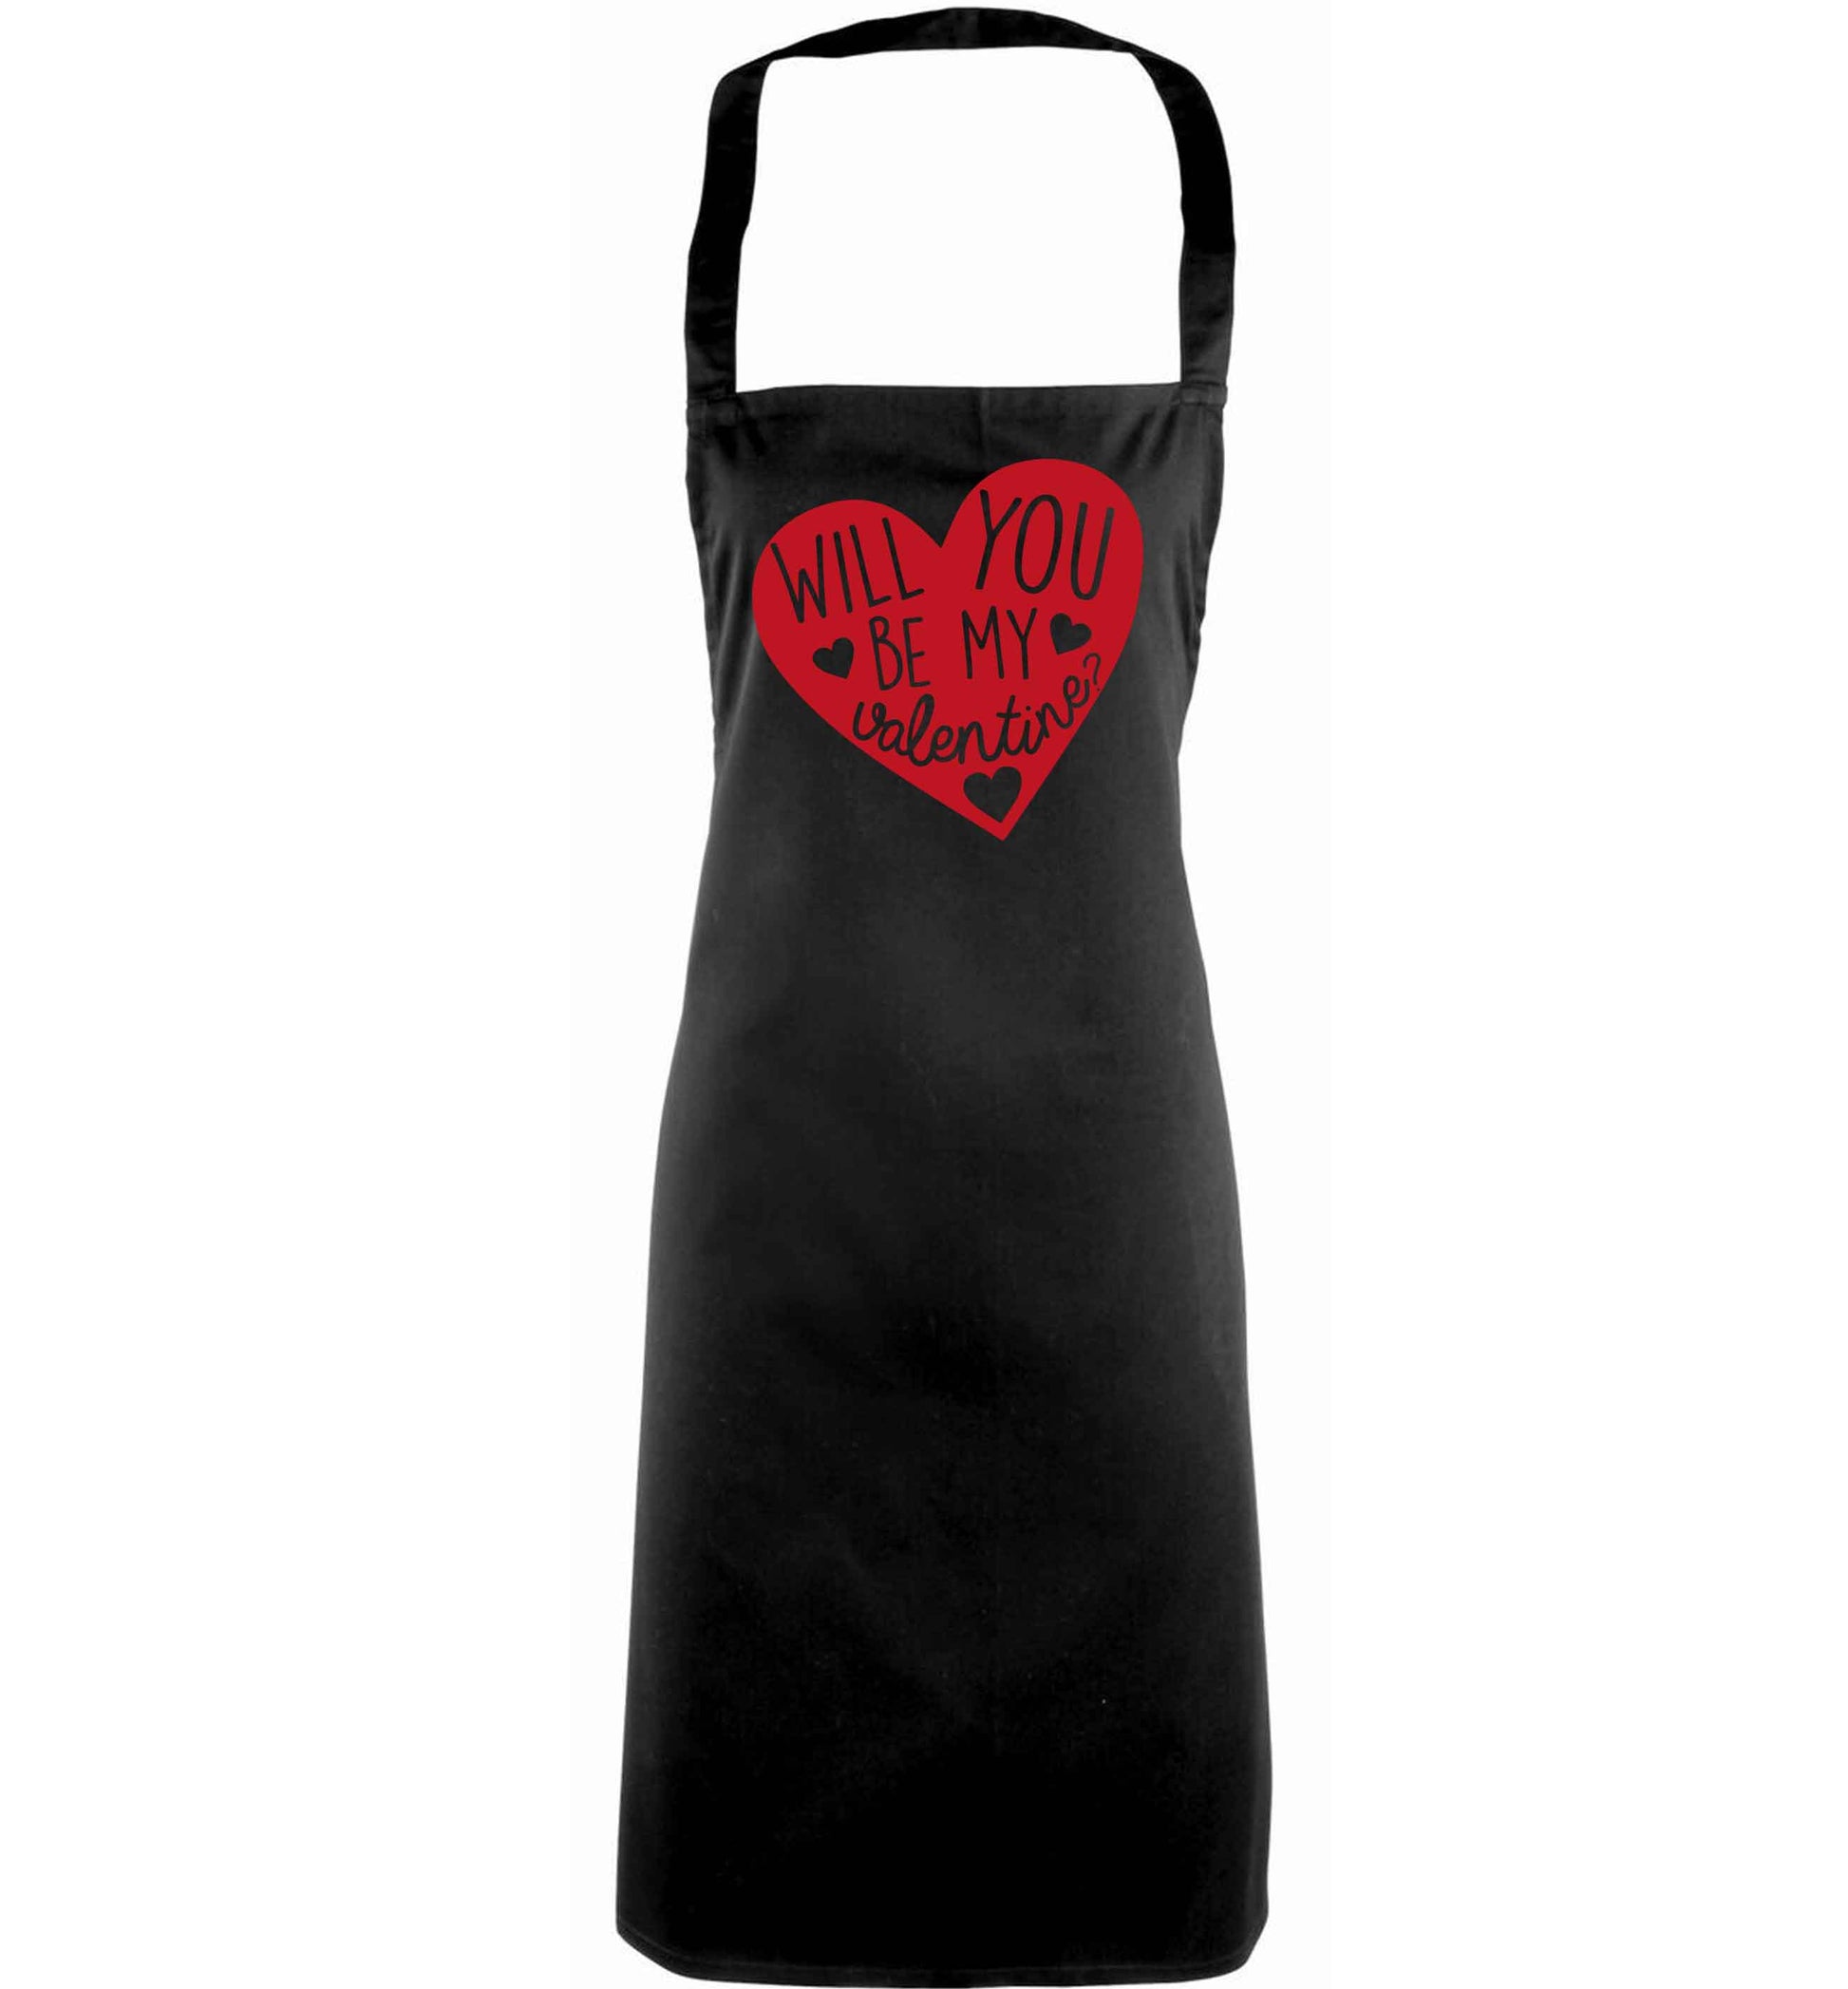 Will you be my valentine? adults black apron